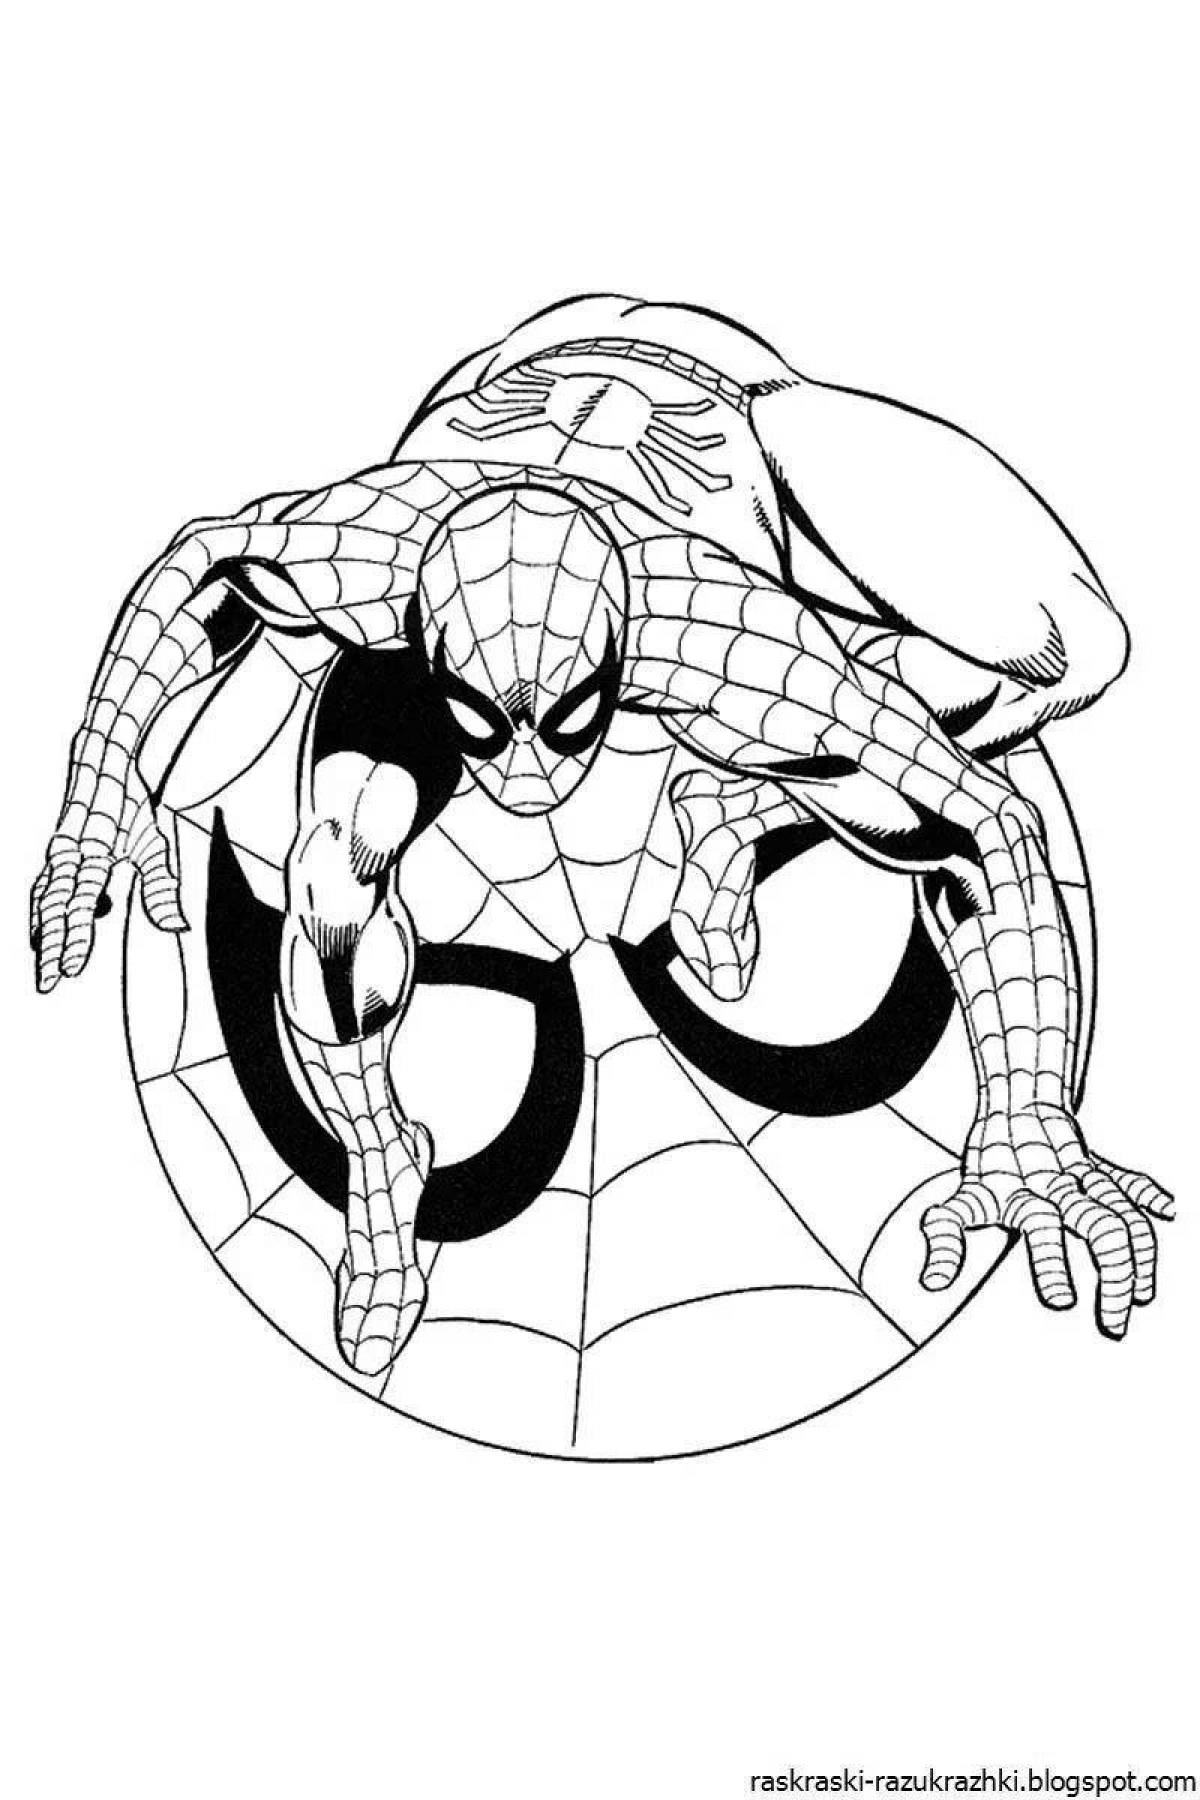 Fantastic spiderman coloring page for kids